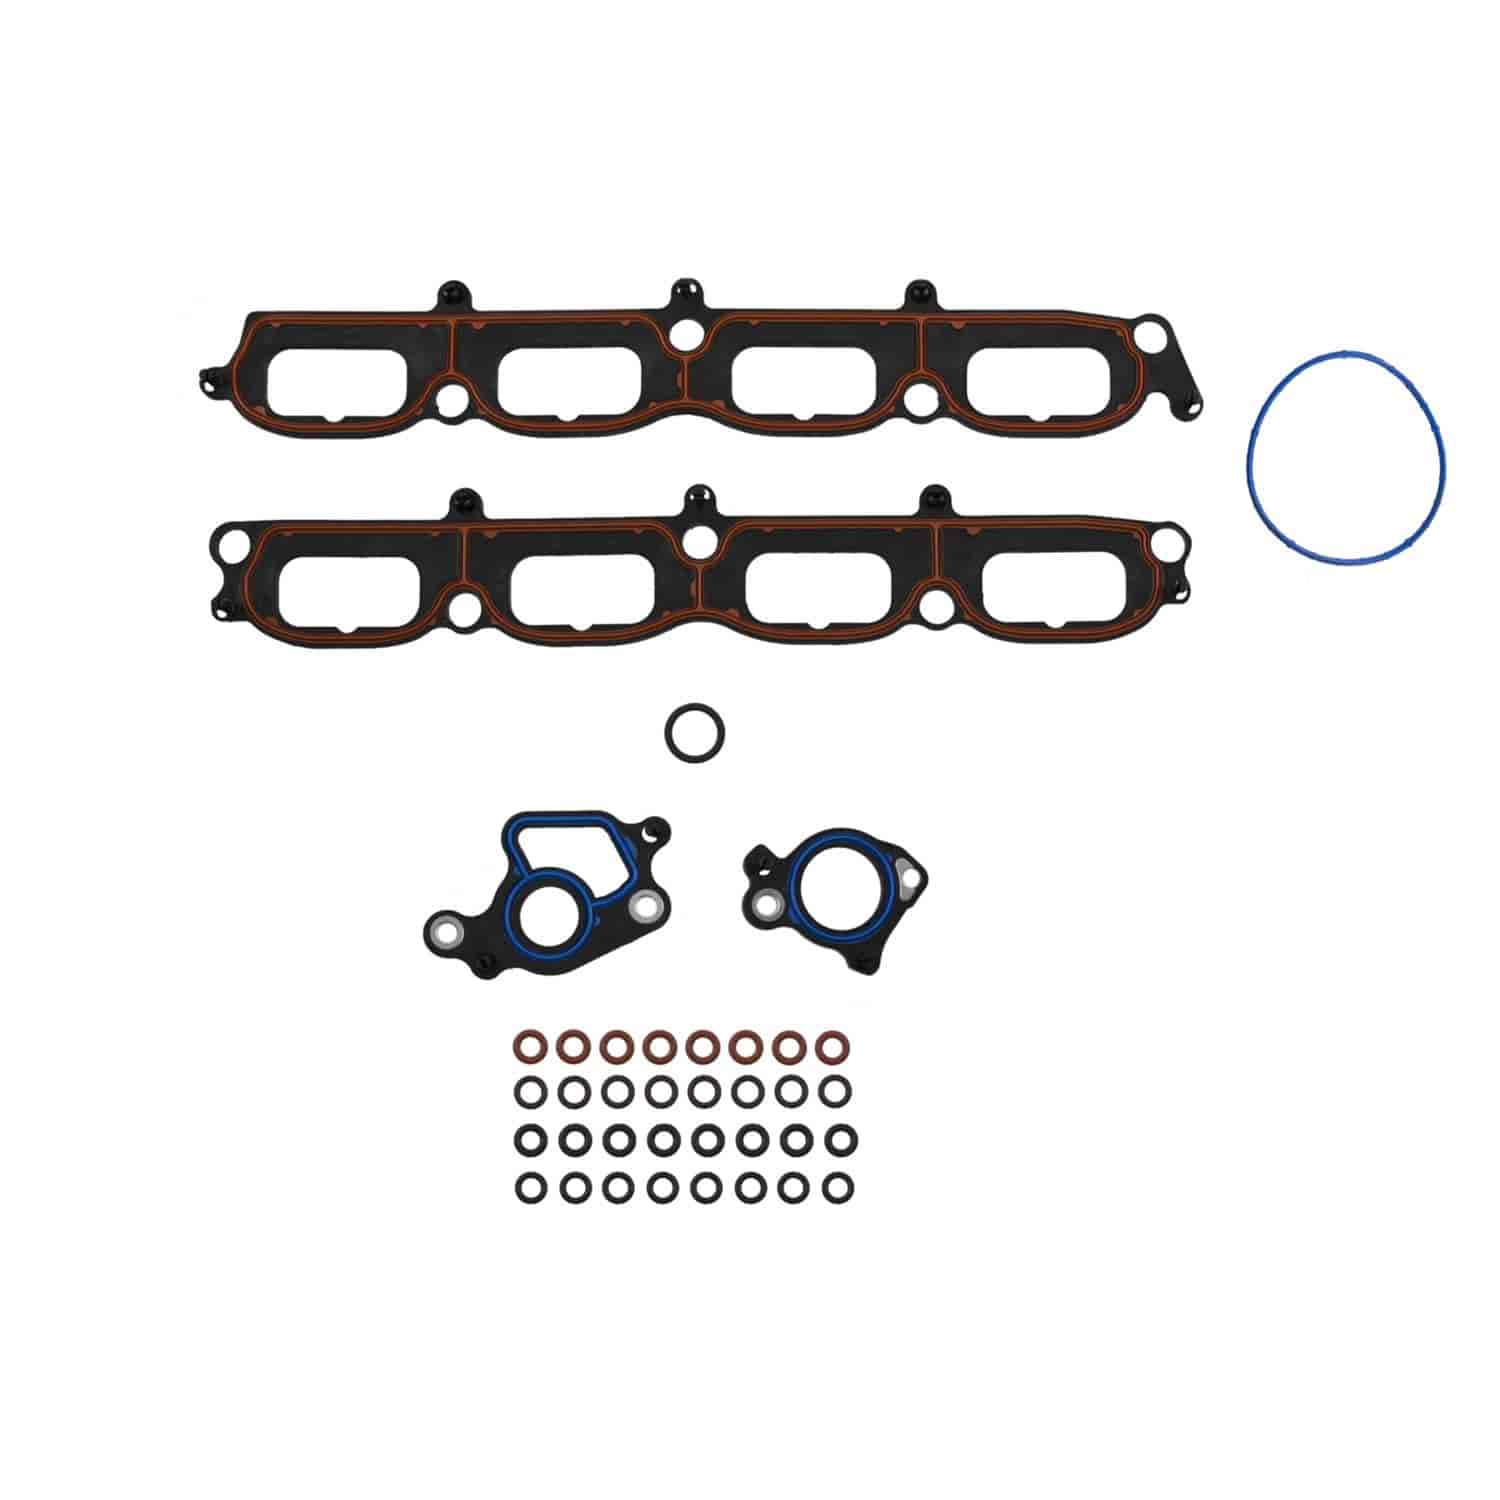 Intake Gasket for Select 2005-2014 Ford/Lincoln Models with 5.4L V8 Engine